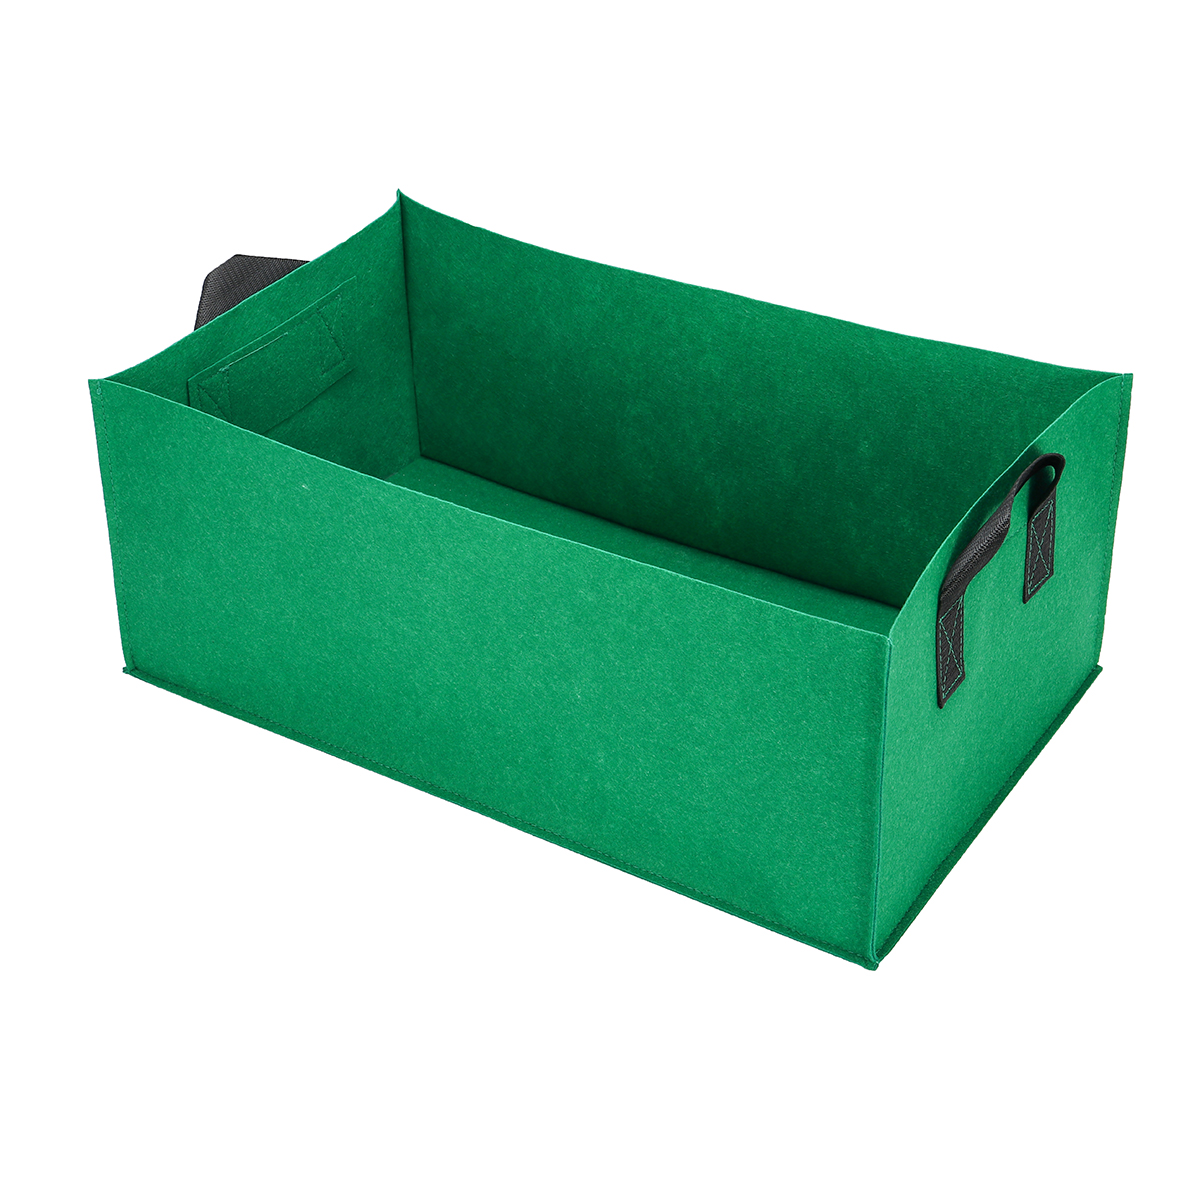 Find Raised Planting Bed Garden Flower Planter Elevated Vegetable Box Planting Grow Bag for Sale on Gipsybee.com with cryptocurrencies